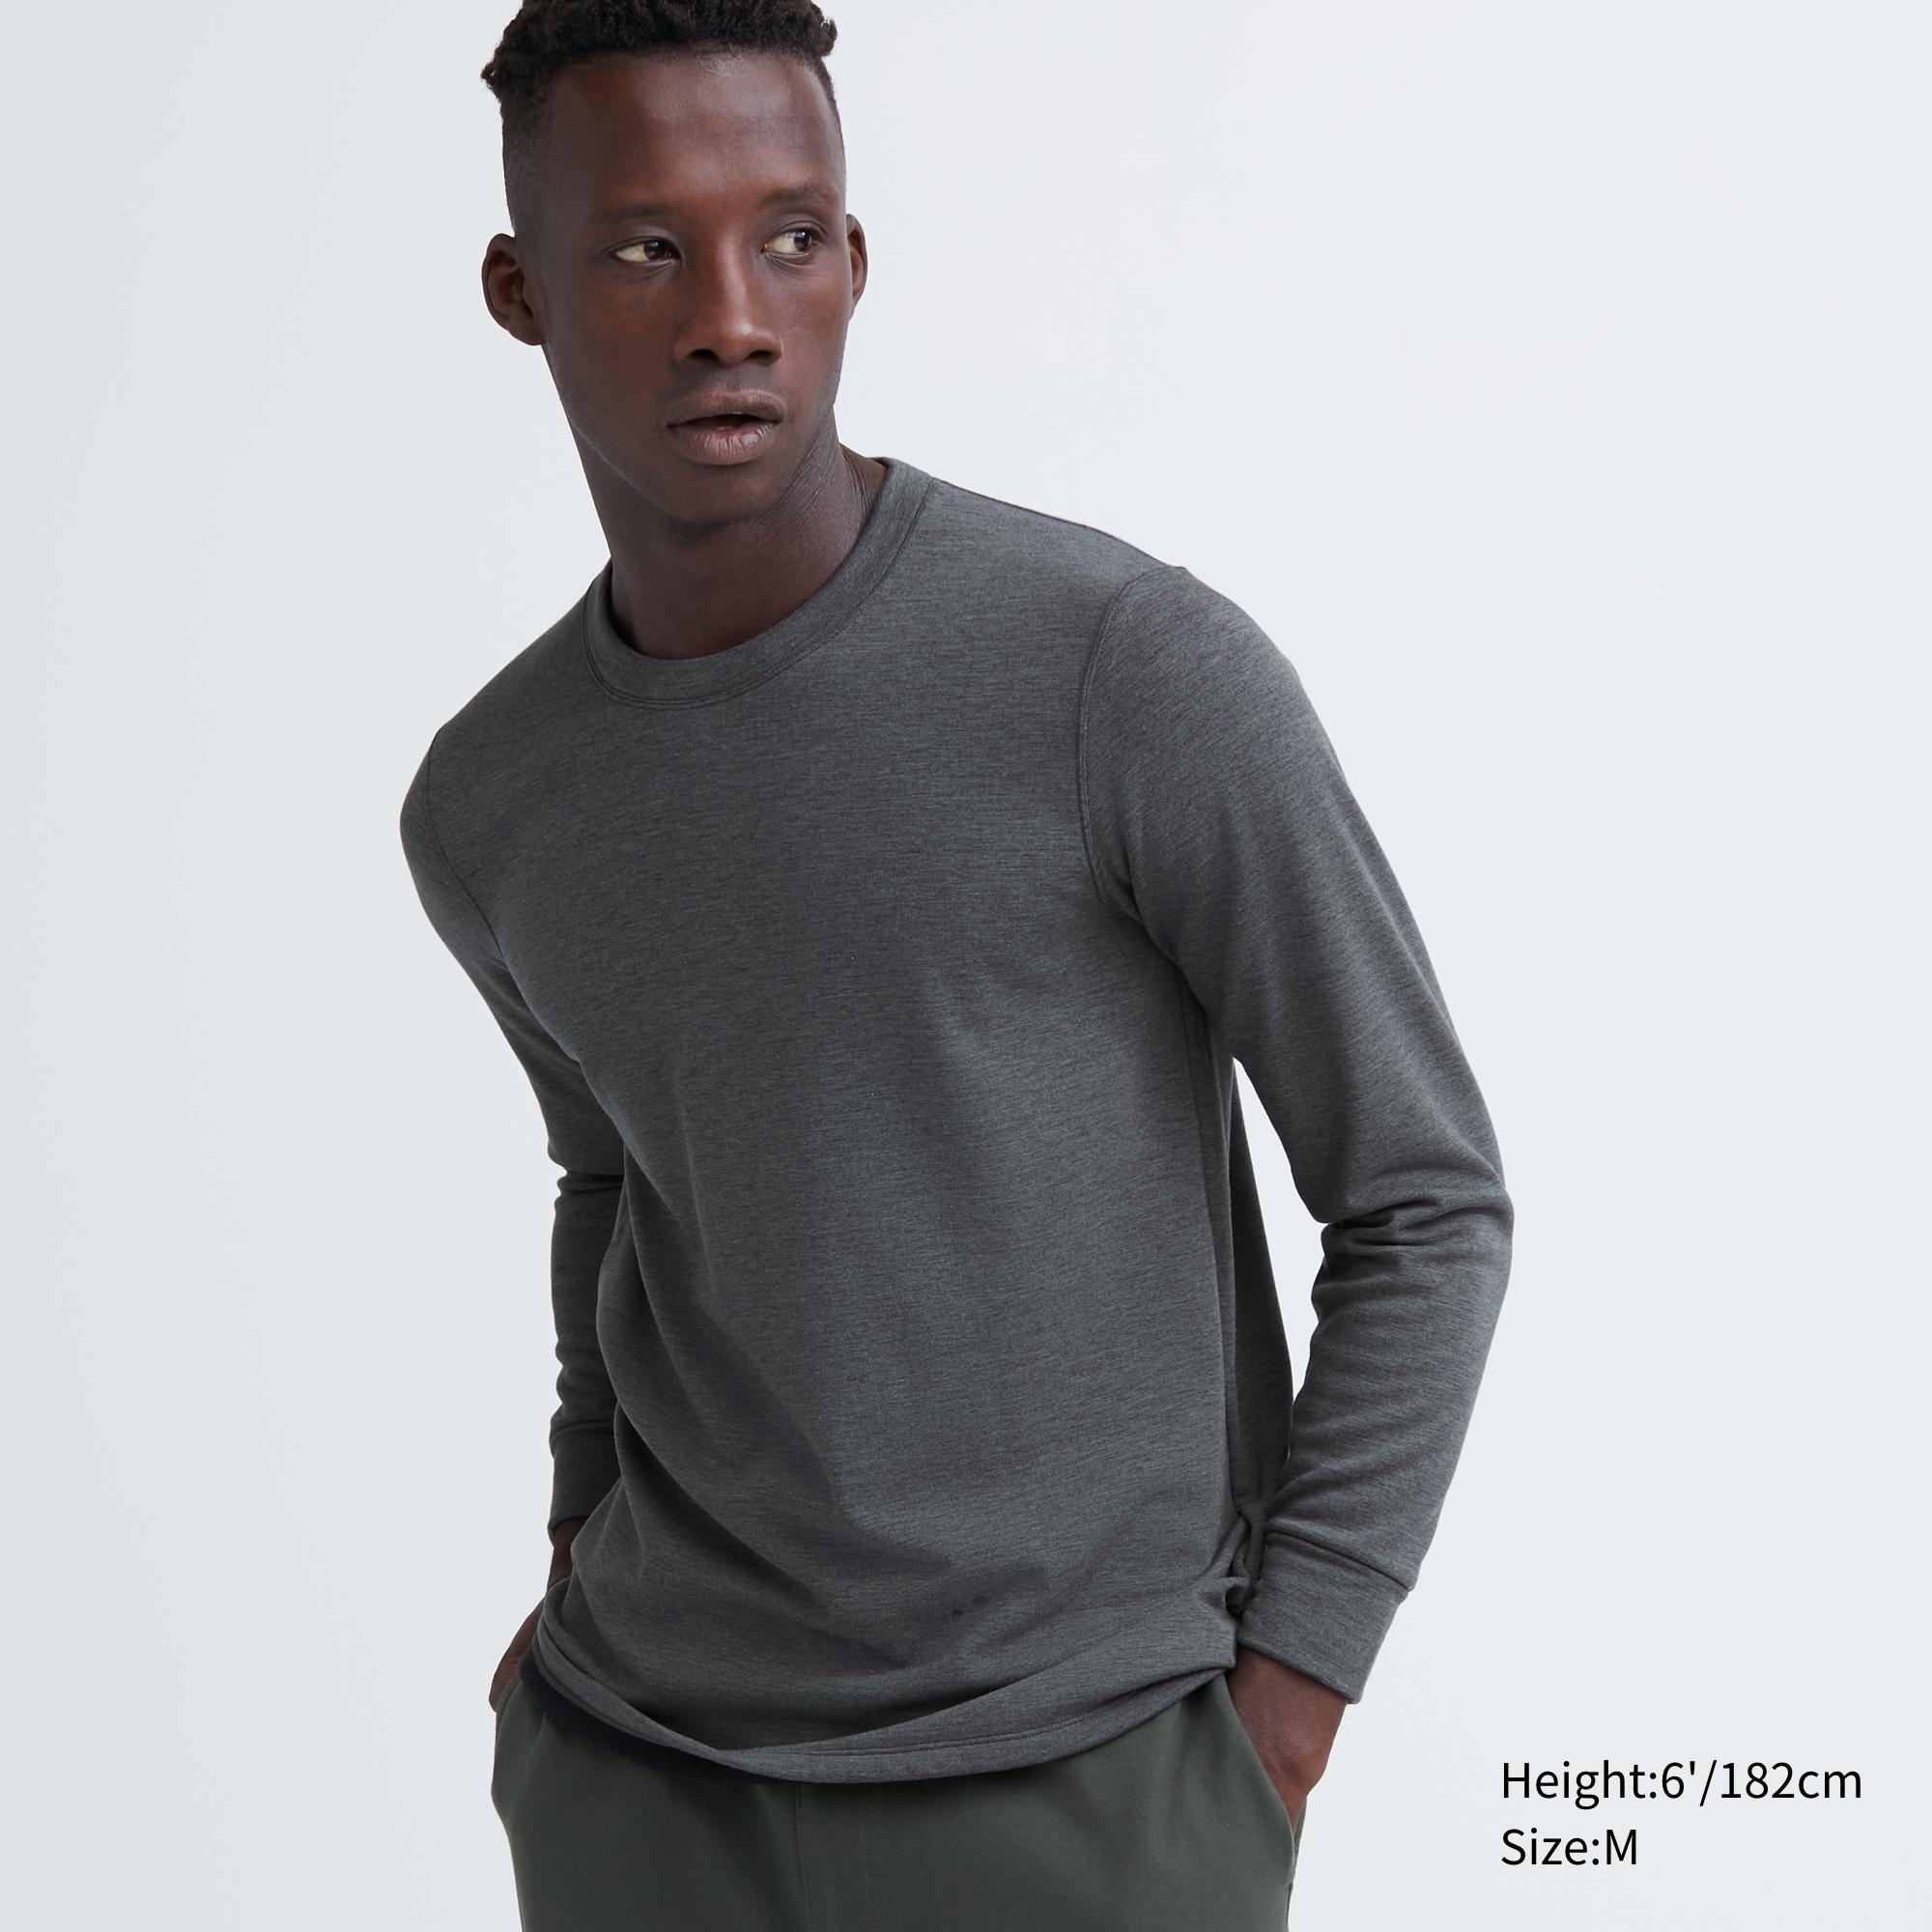 Uniqlo Singapore - HEATTECH Ultra Warm is our most technologically